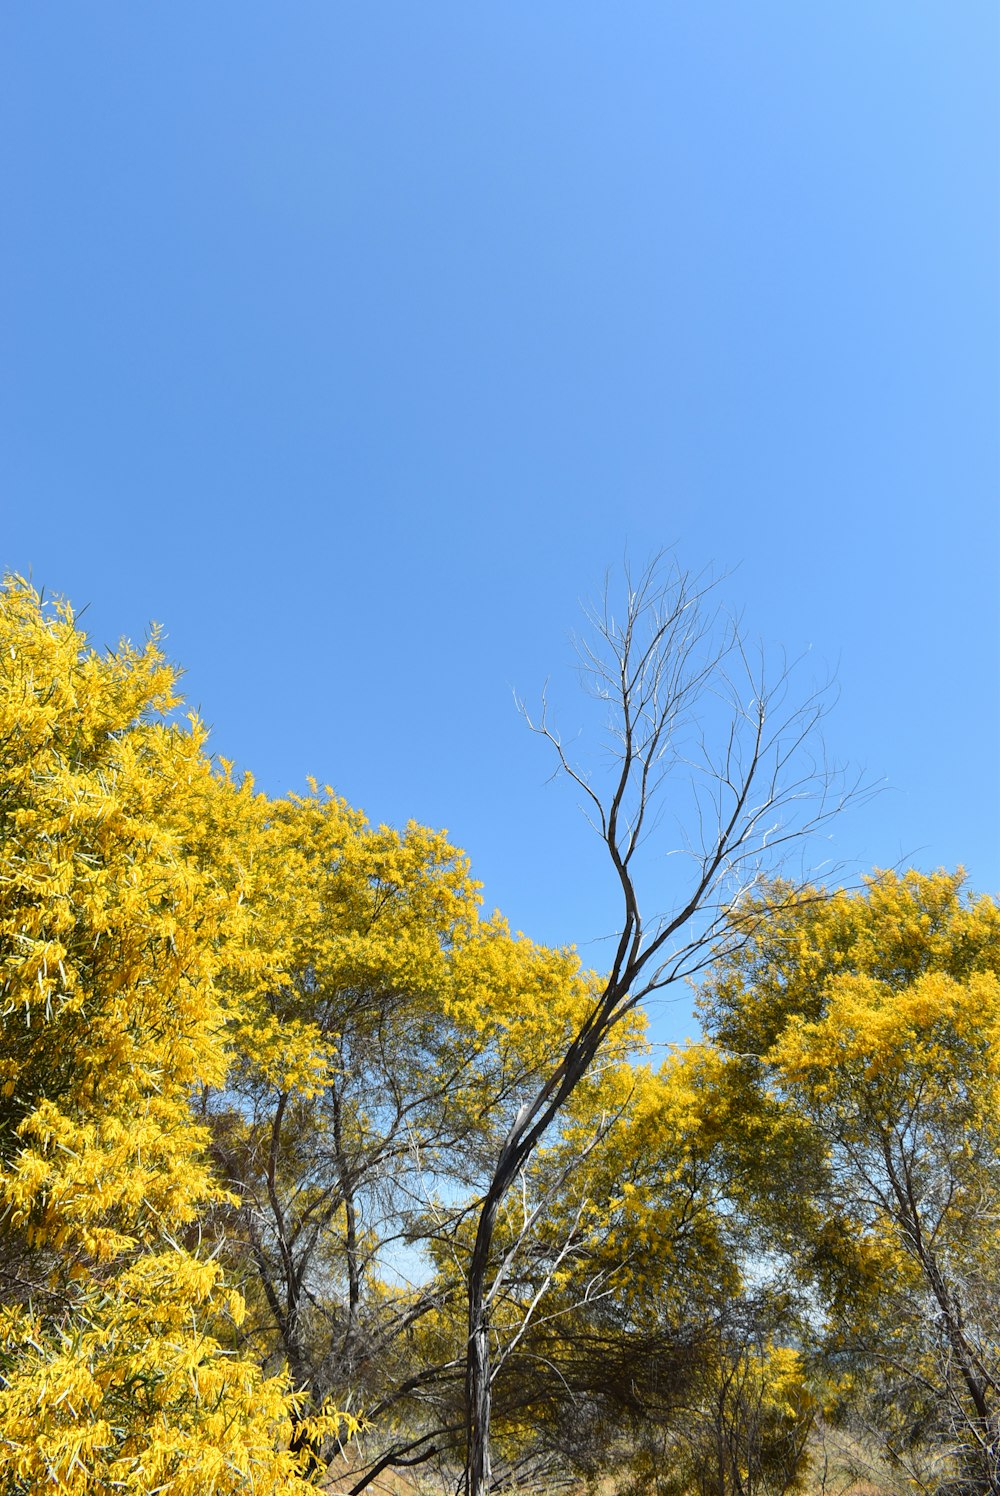 a tree with yellow leaves in the foreground and a blue sky in the background